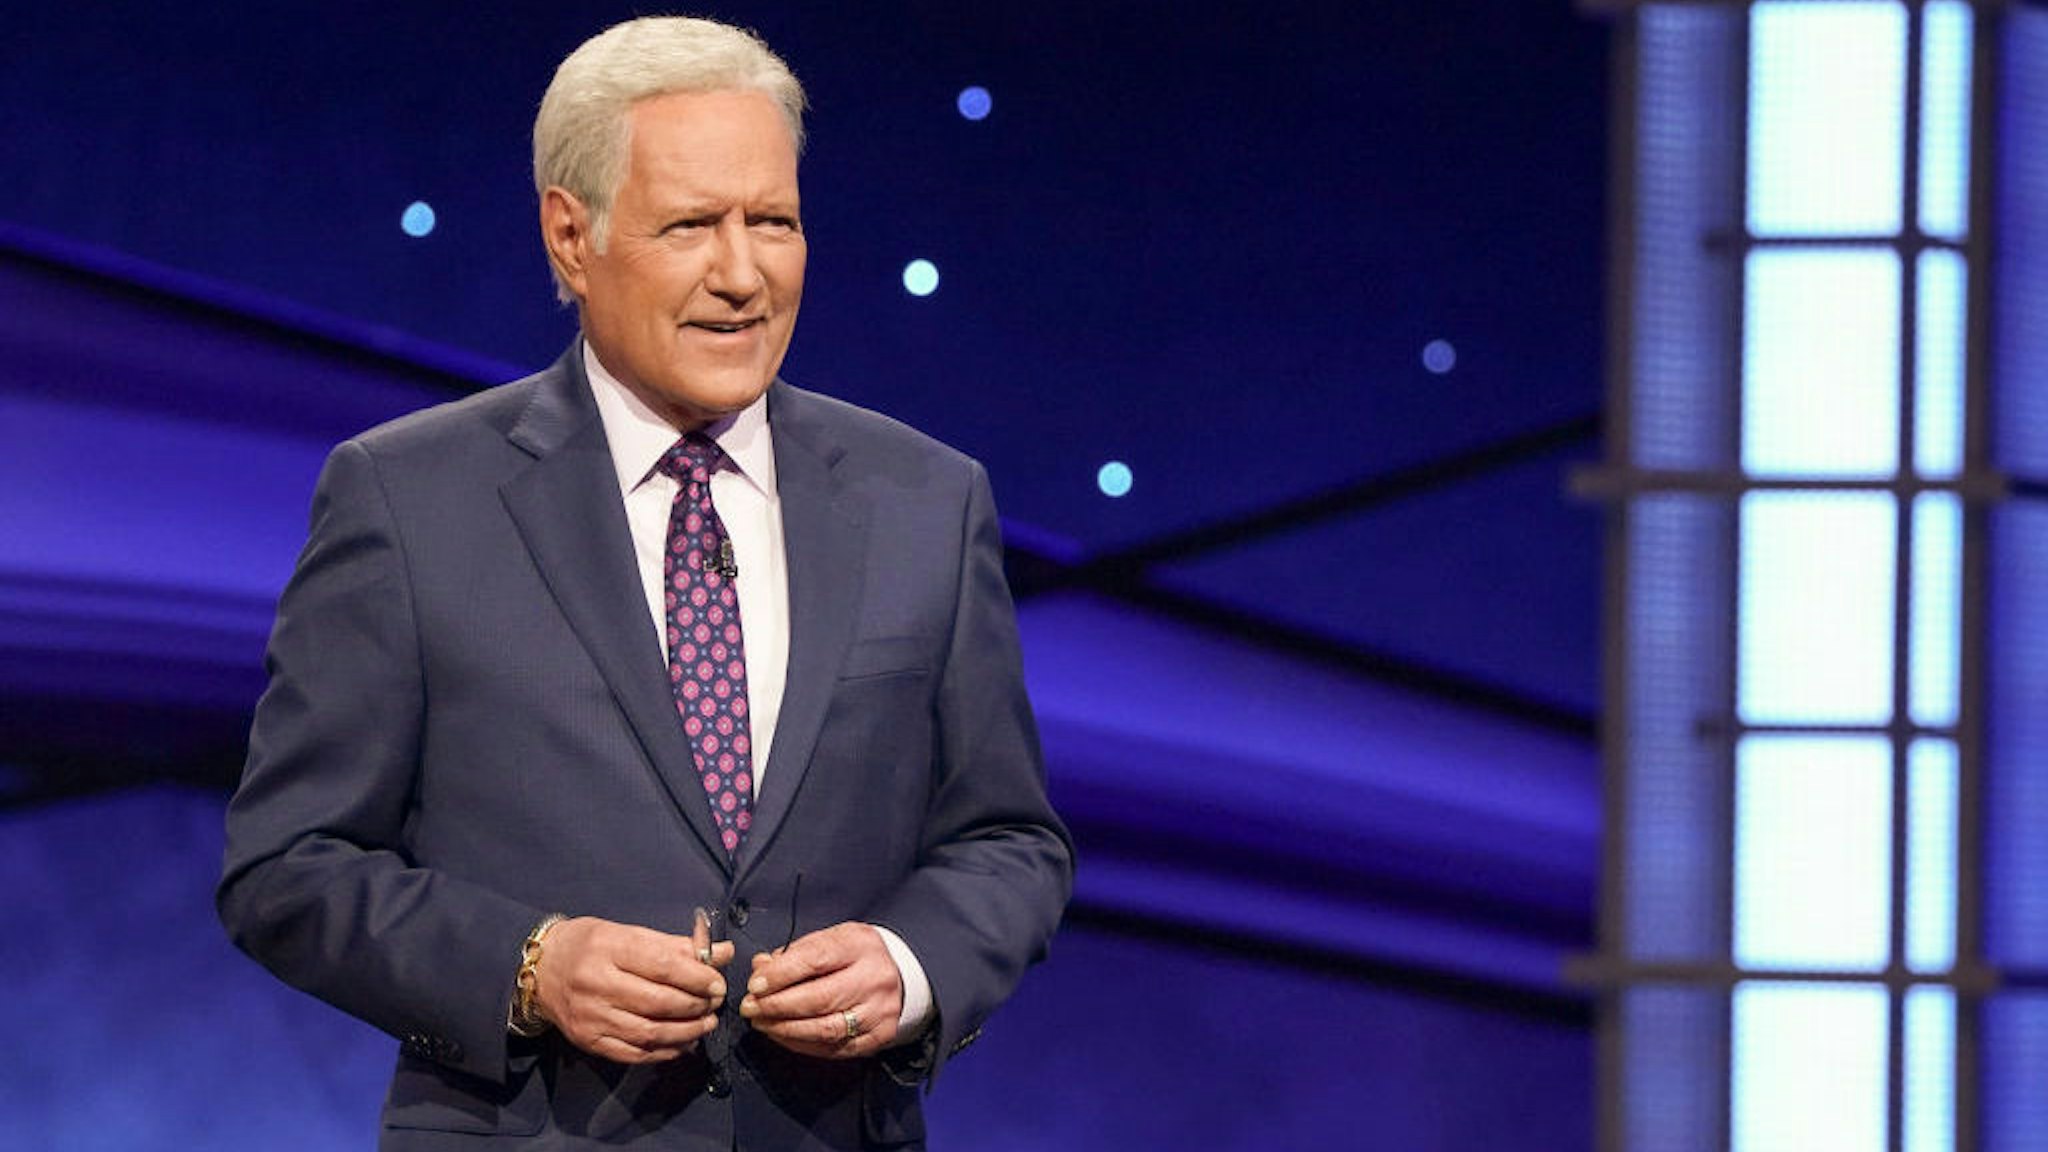 JEOPARDY! THE GREATEST OF ALL TIME - On the heels of the iconic Tournament of Champions, JEOPARDY! is coming to ABC in a multiple consecutive night event with JEOPARDY! The Greatest of All Time, premiering TUESDAY, JAN. 7 (8:00-9:00 p.m. EST), on ABC. (Eric McCandless/ABC via Getty Images)